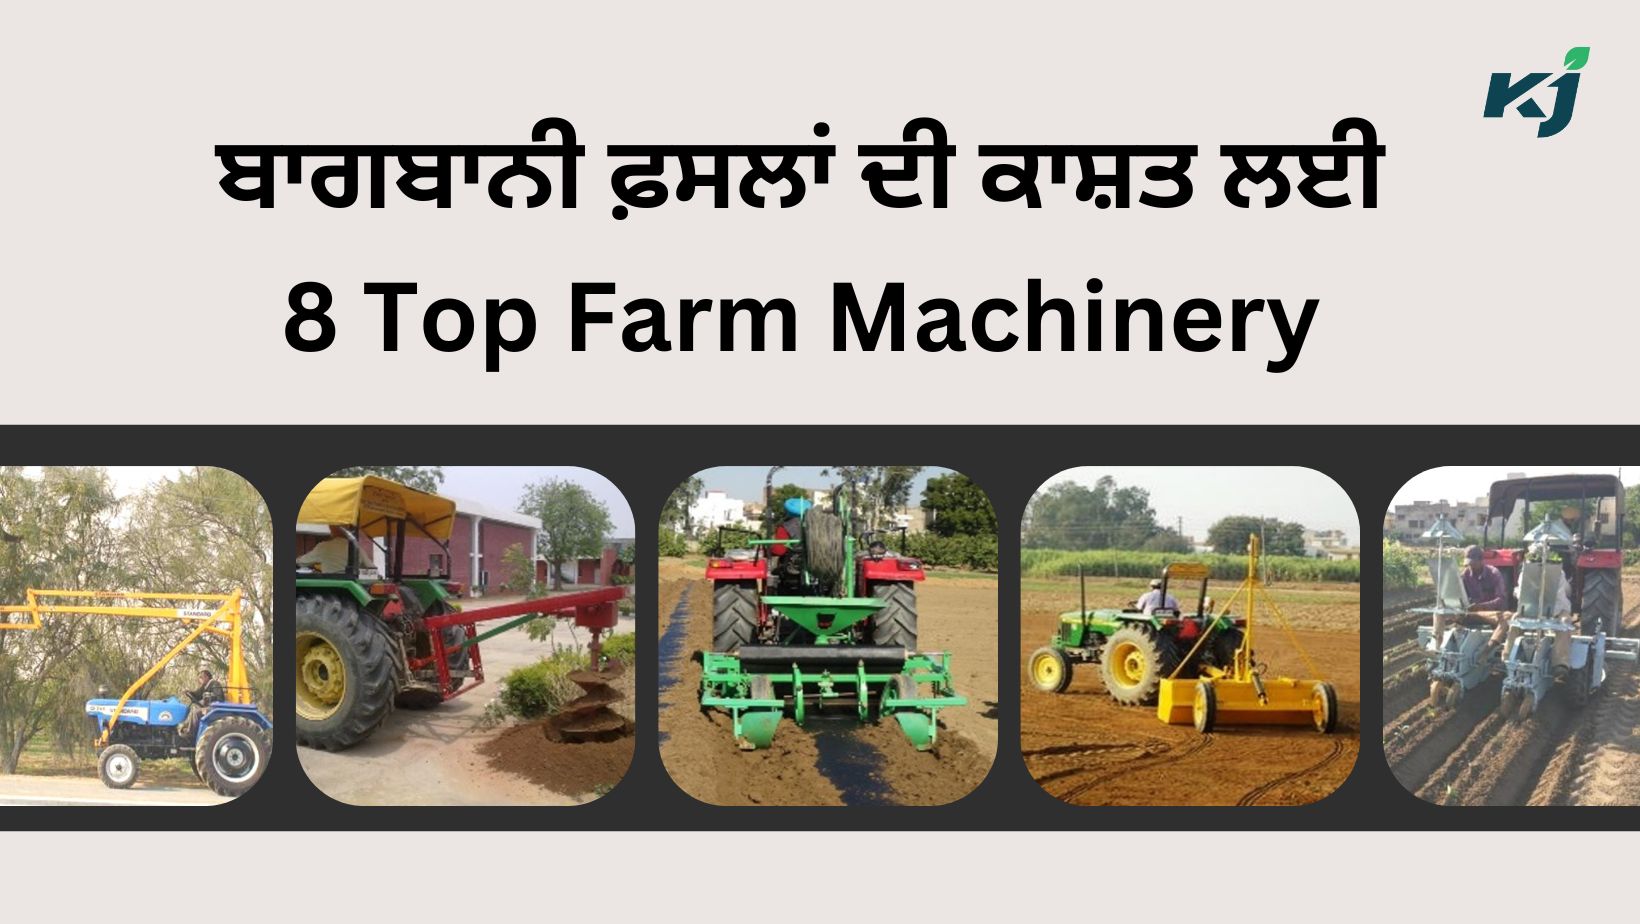 Farm Machinery for Horticultural Crops